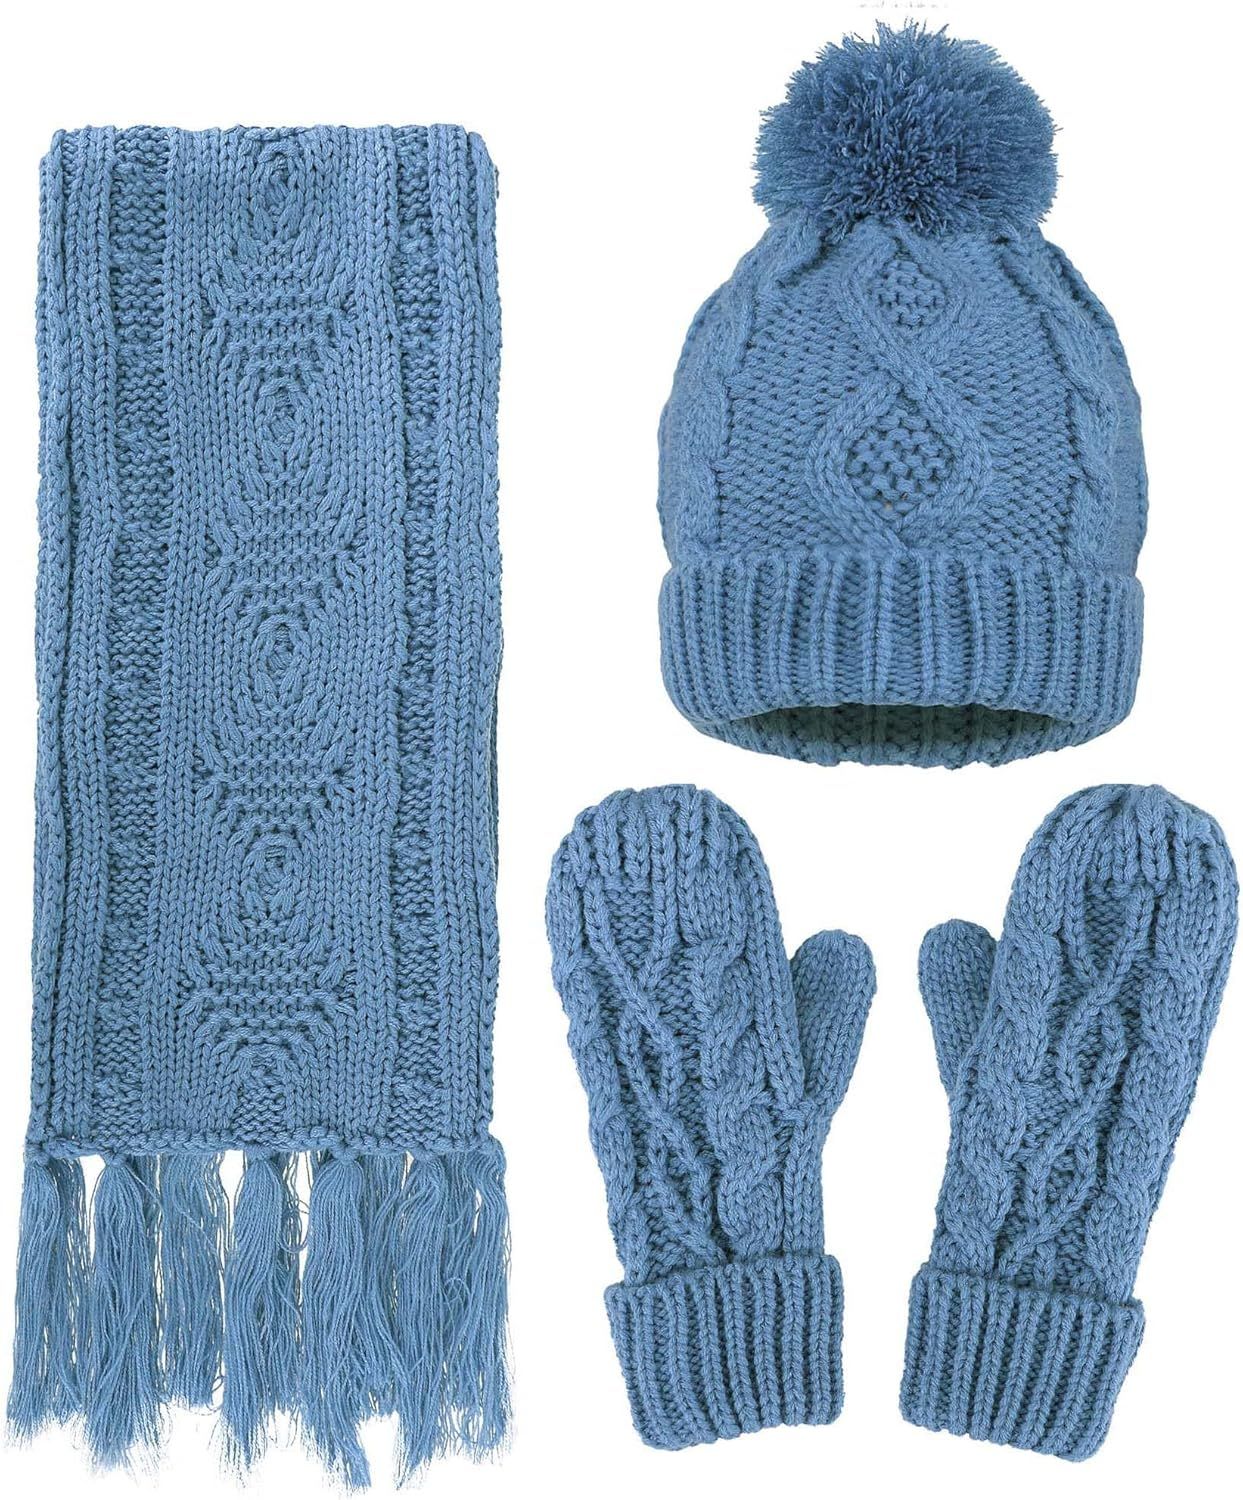 ANDORRA 3 in 1 Women Soft Warm Thick Cable Knitted Hat Scarf & Gloves Winter Set | Amazon (US)